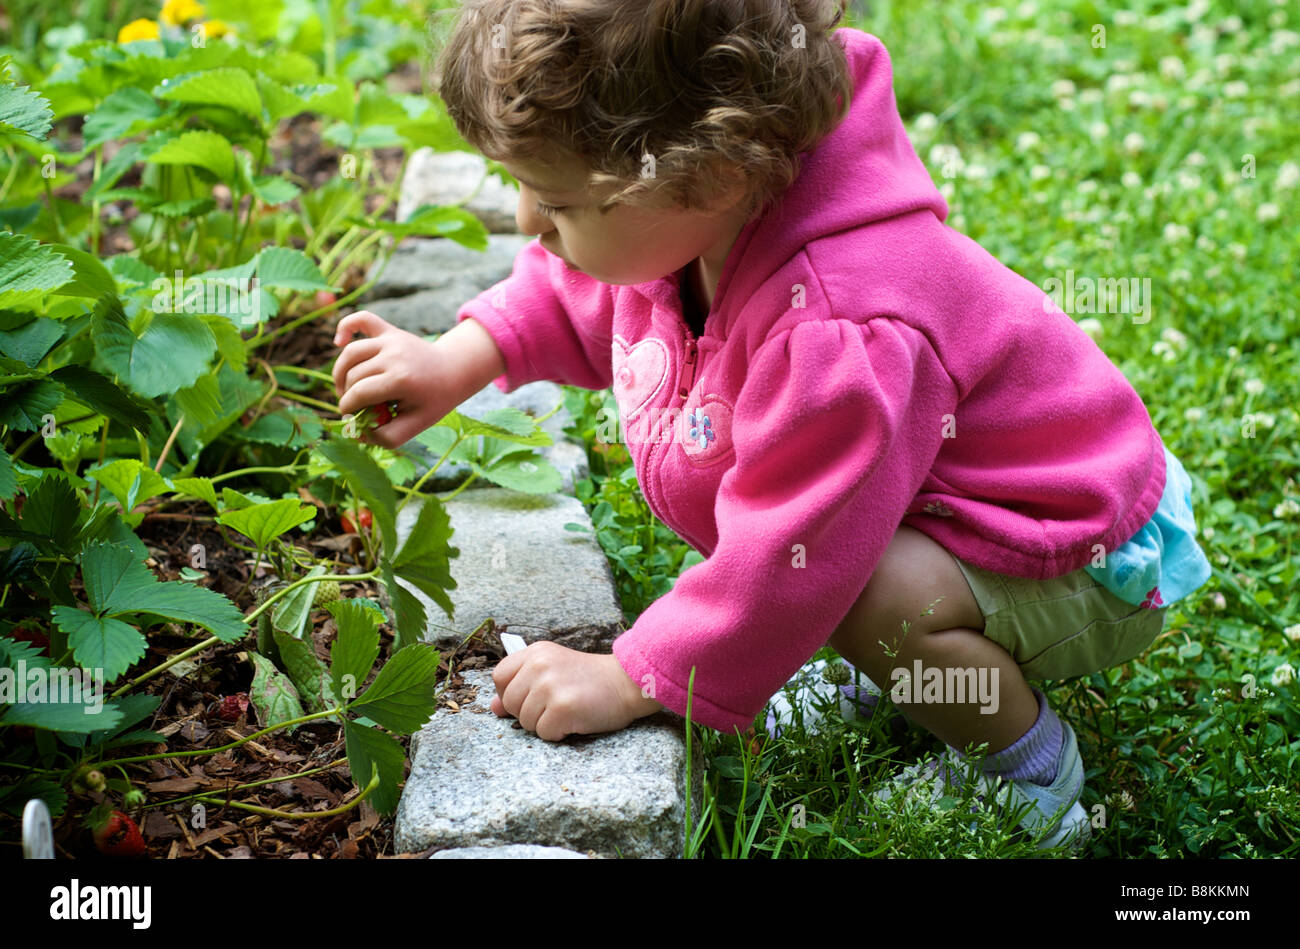 Child Bends Down to Pick Strawberries from a Homemade Garden Stock Photo